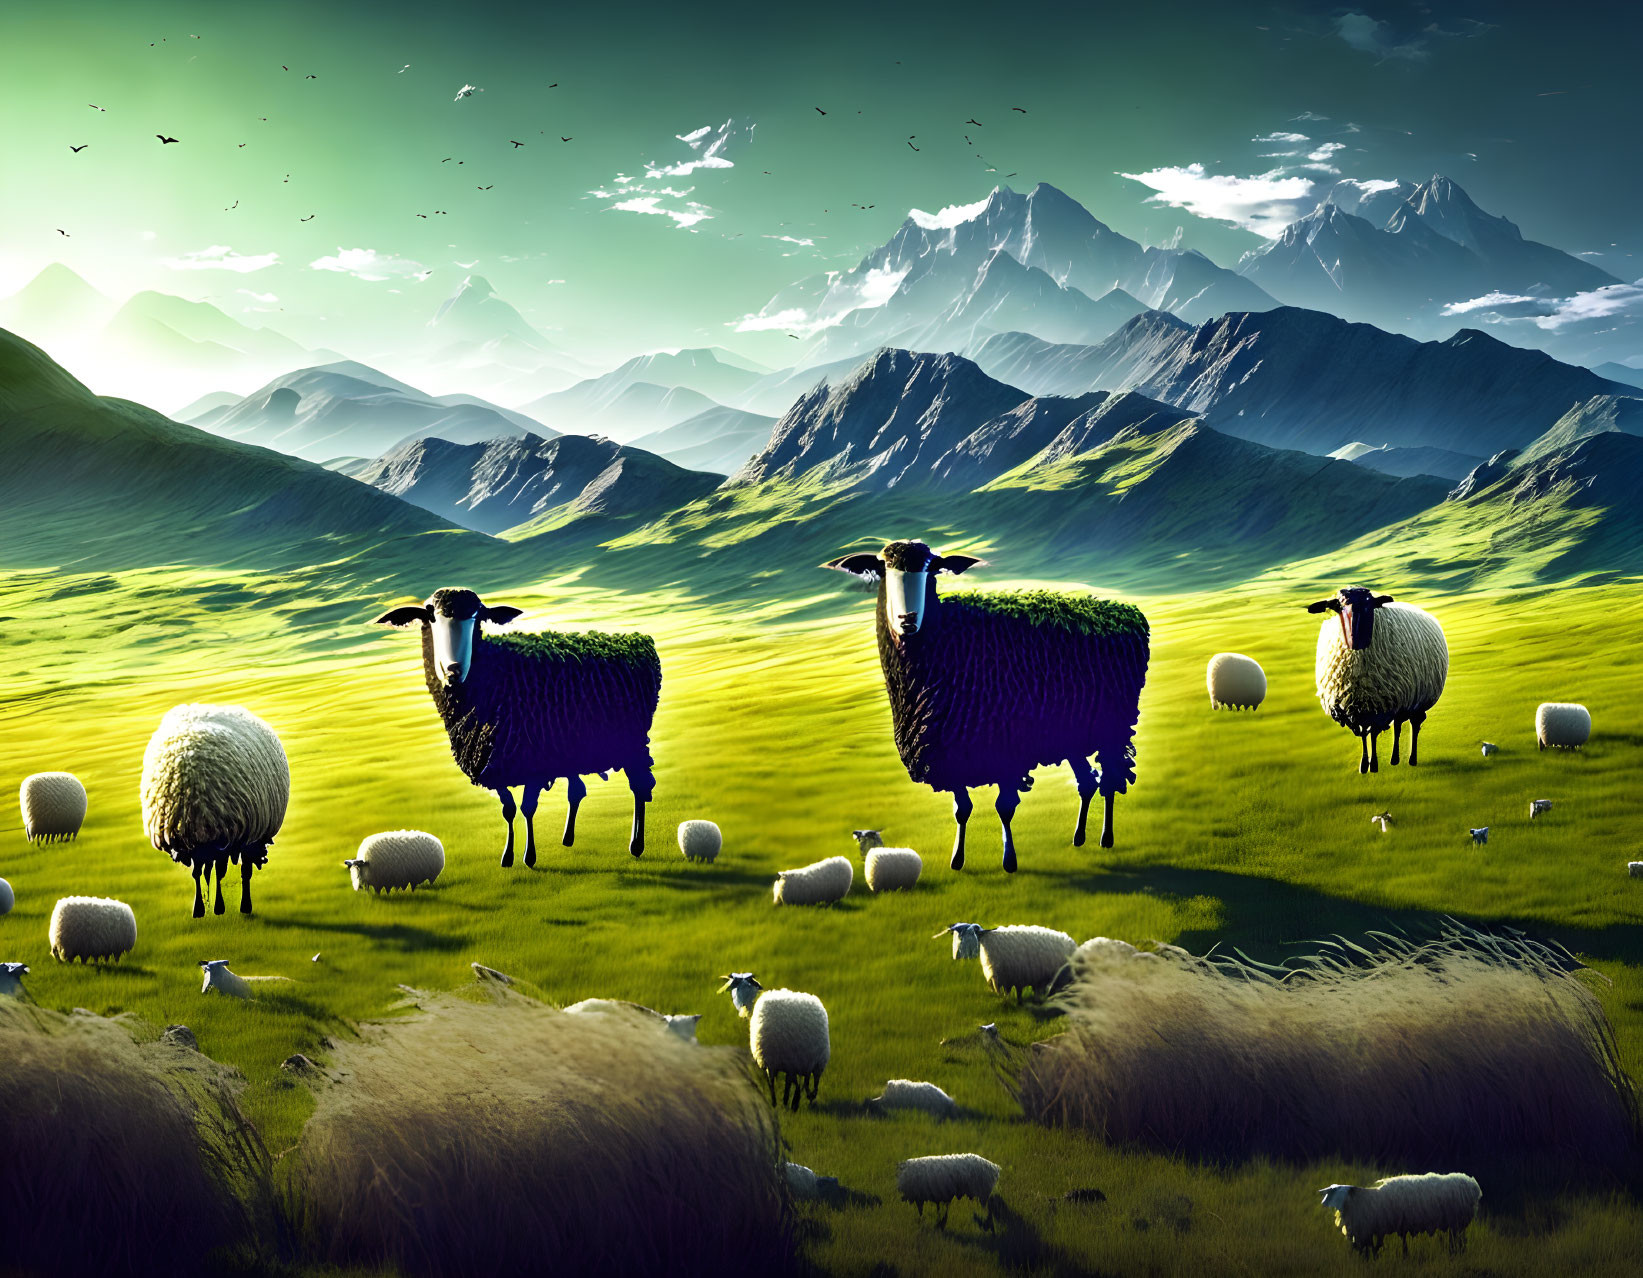 Vibrant grassy field with oversized sheep, small grazing sheep, mountains, and birds